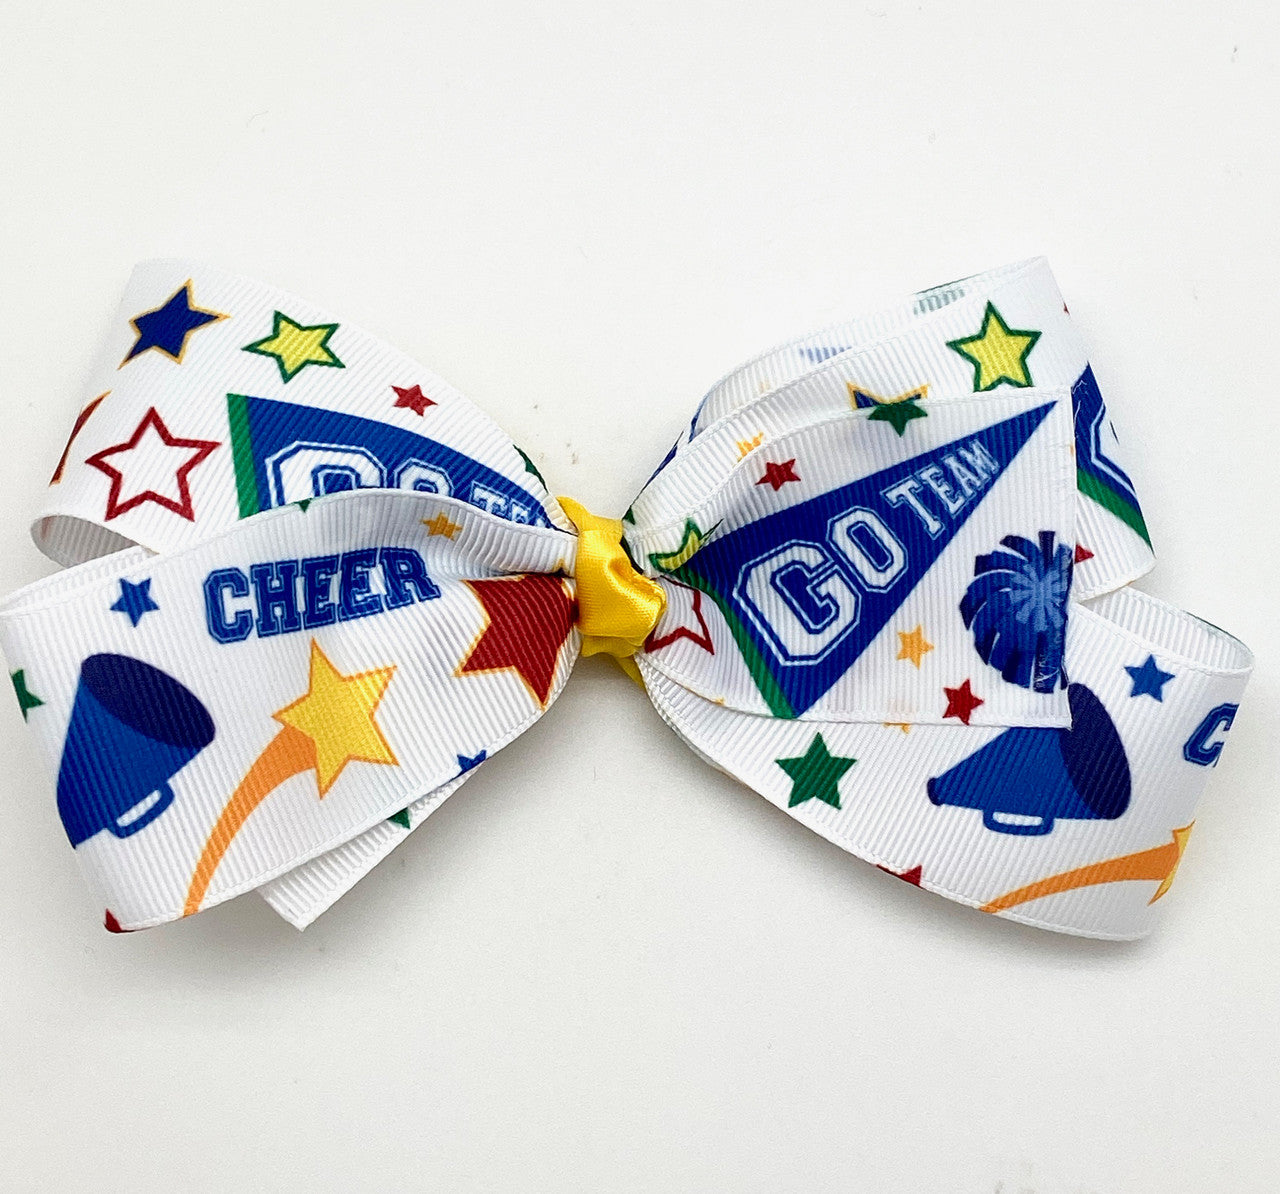 This fun cheerleading ribbon printed on 1.5" white grosgrain makes such a fun cheer bow! Keep the cheerleading spirit by making one of these for your favorite cheerleader!